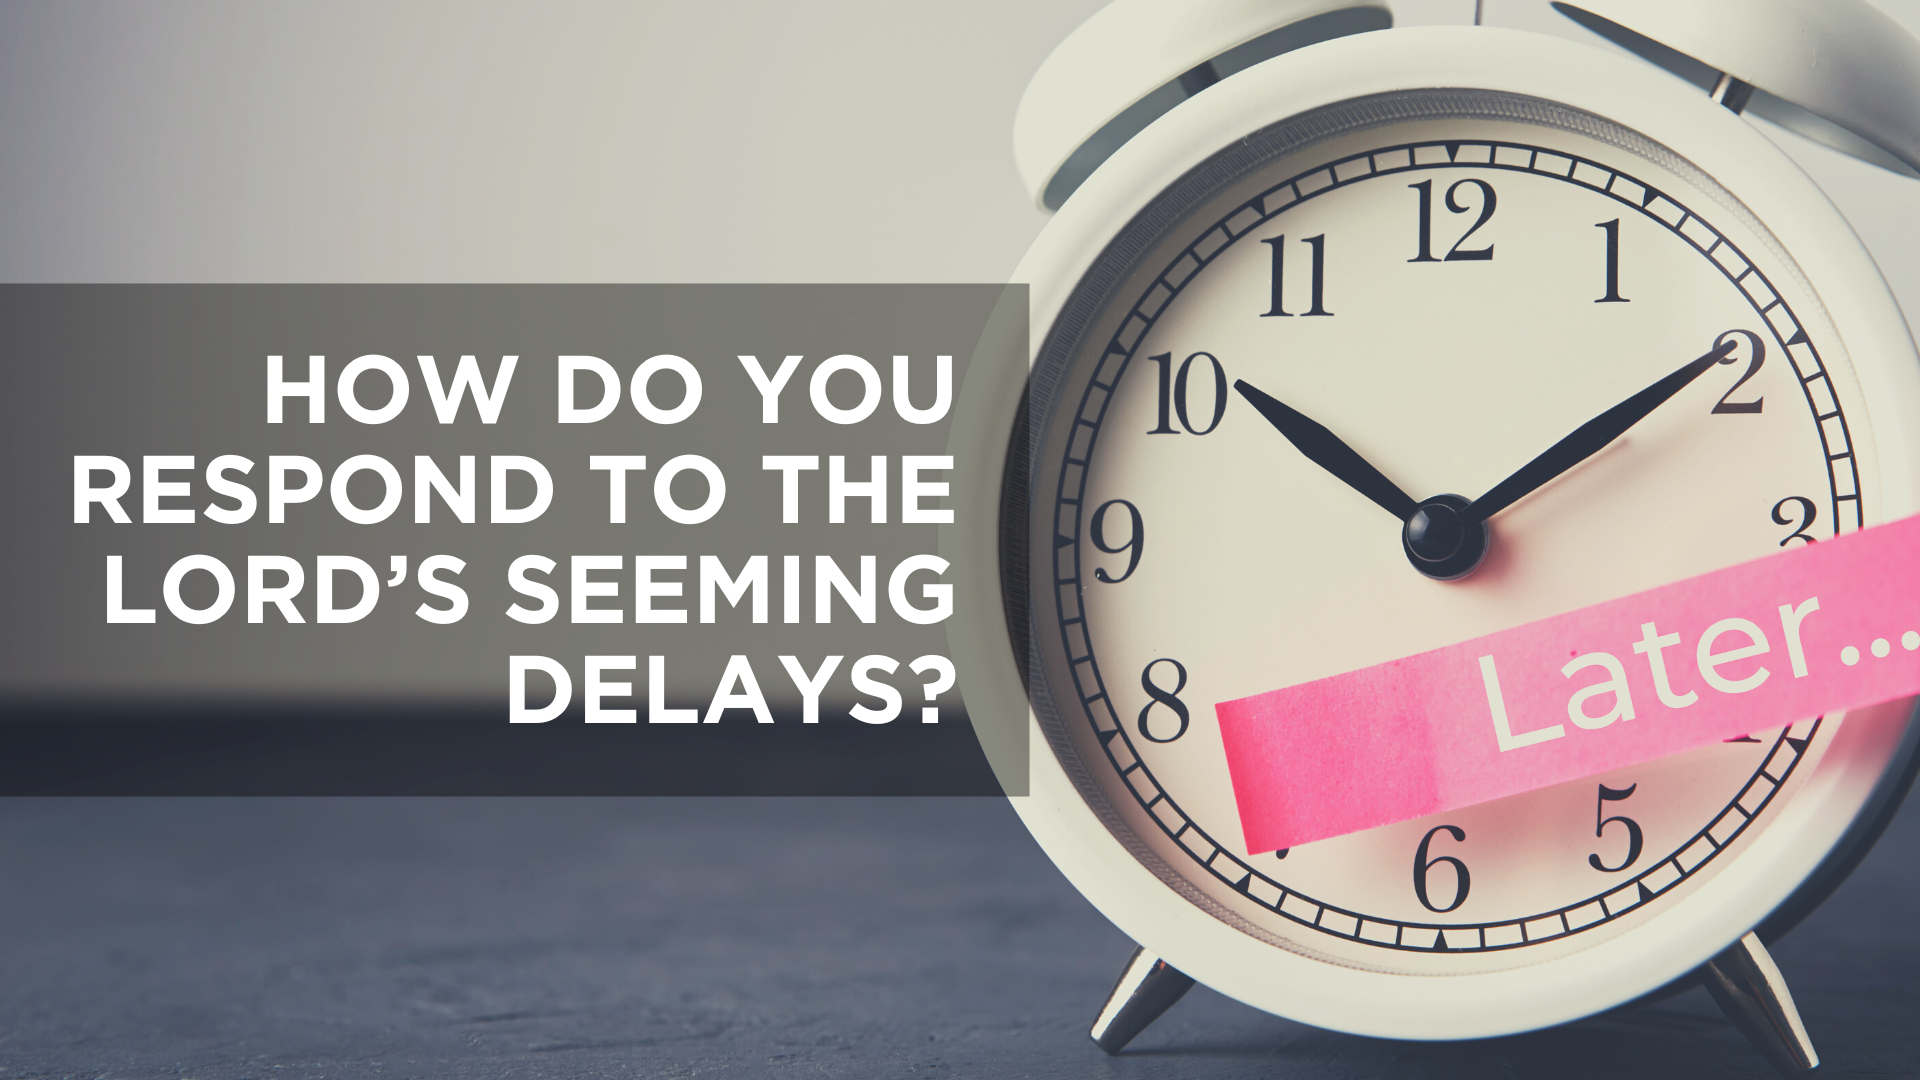 How Do You Respond to the Lord's Seeming Delays?